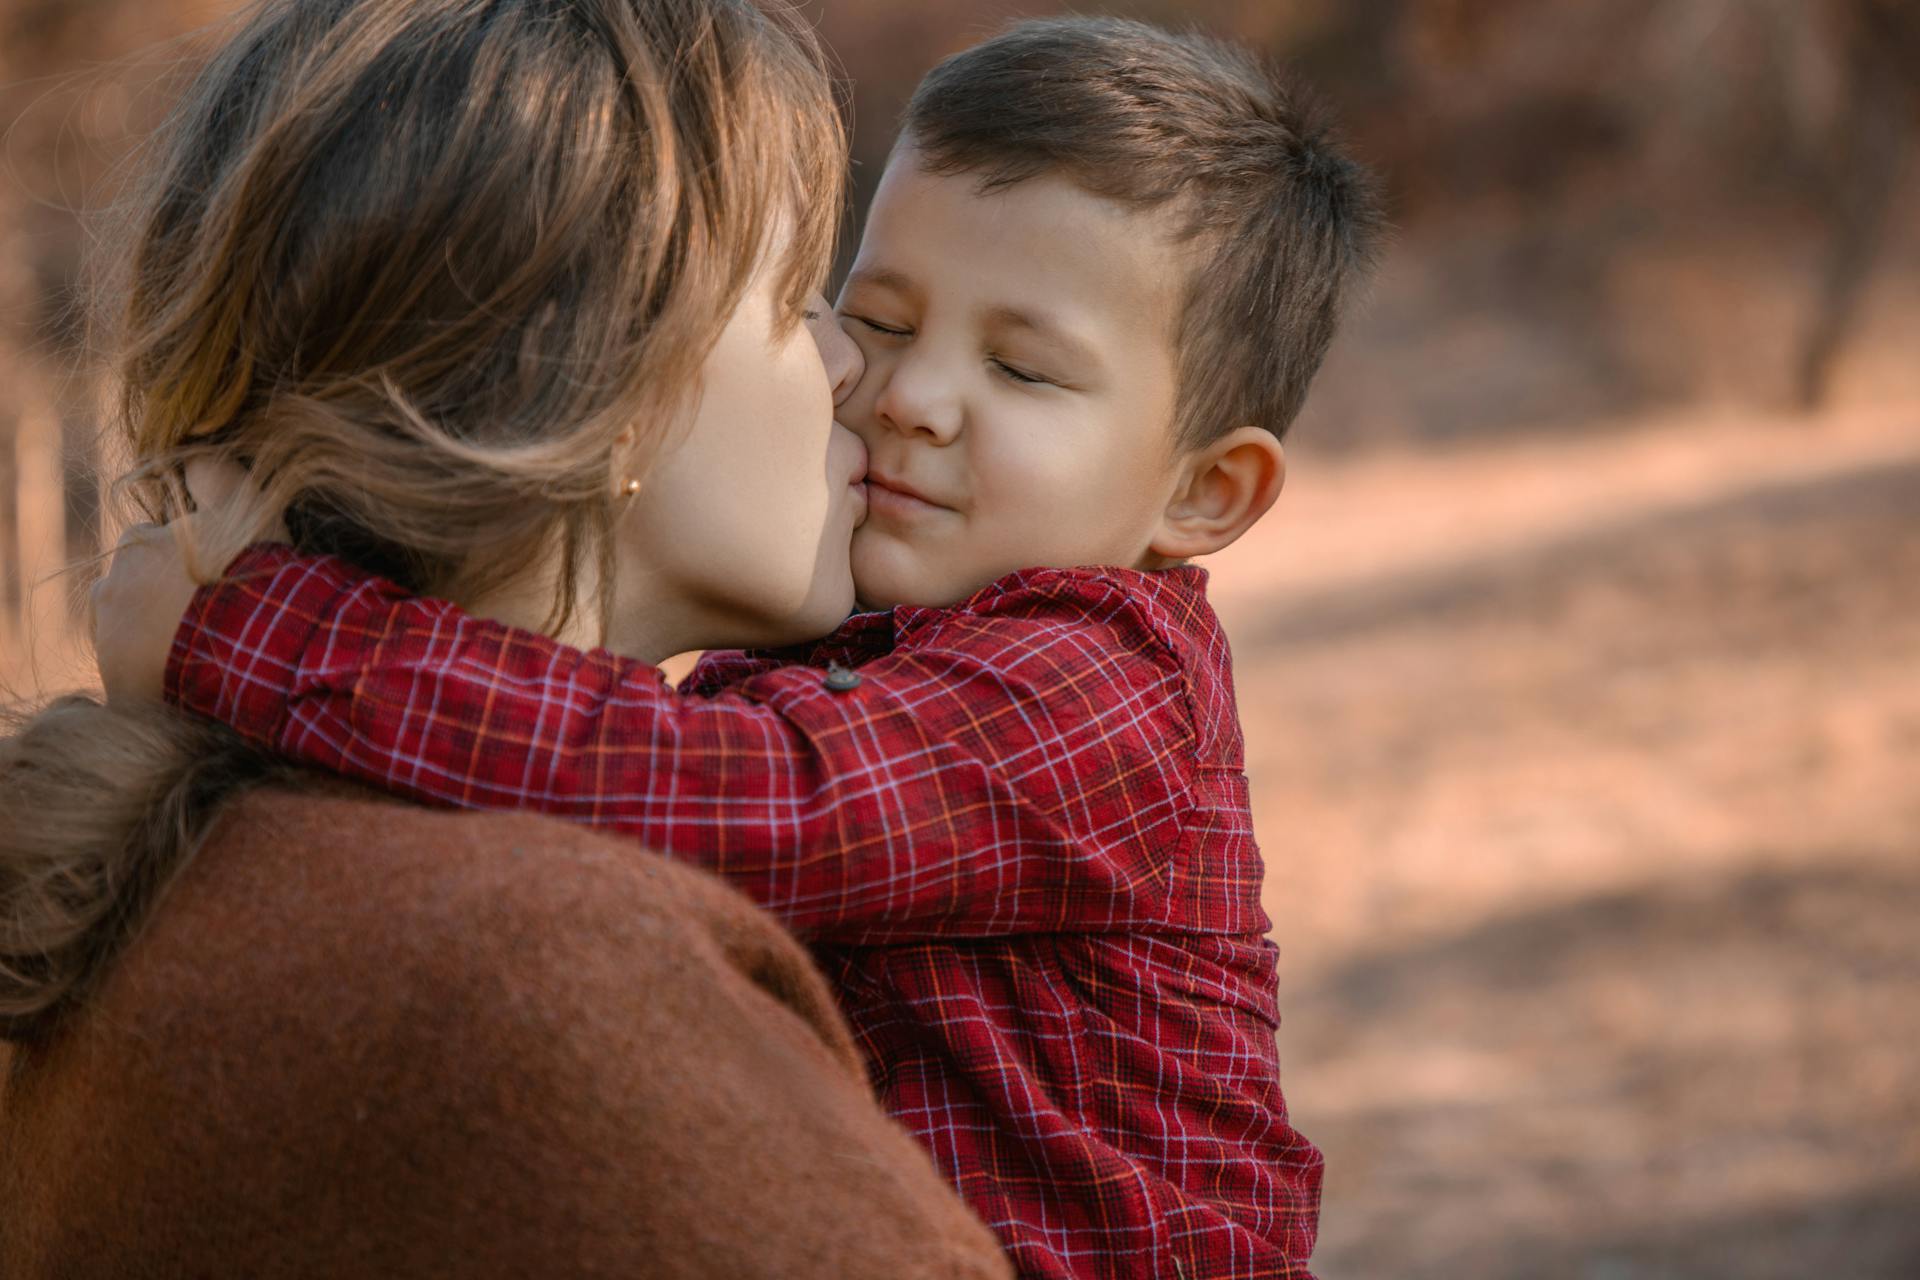 A mother kissing her little boy in a park | Source: Pexels